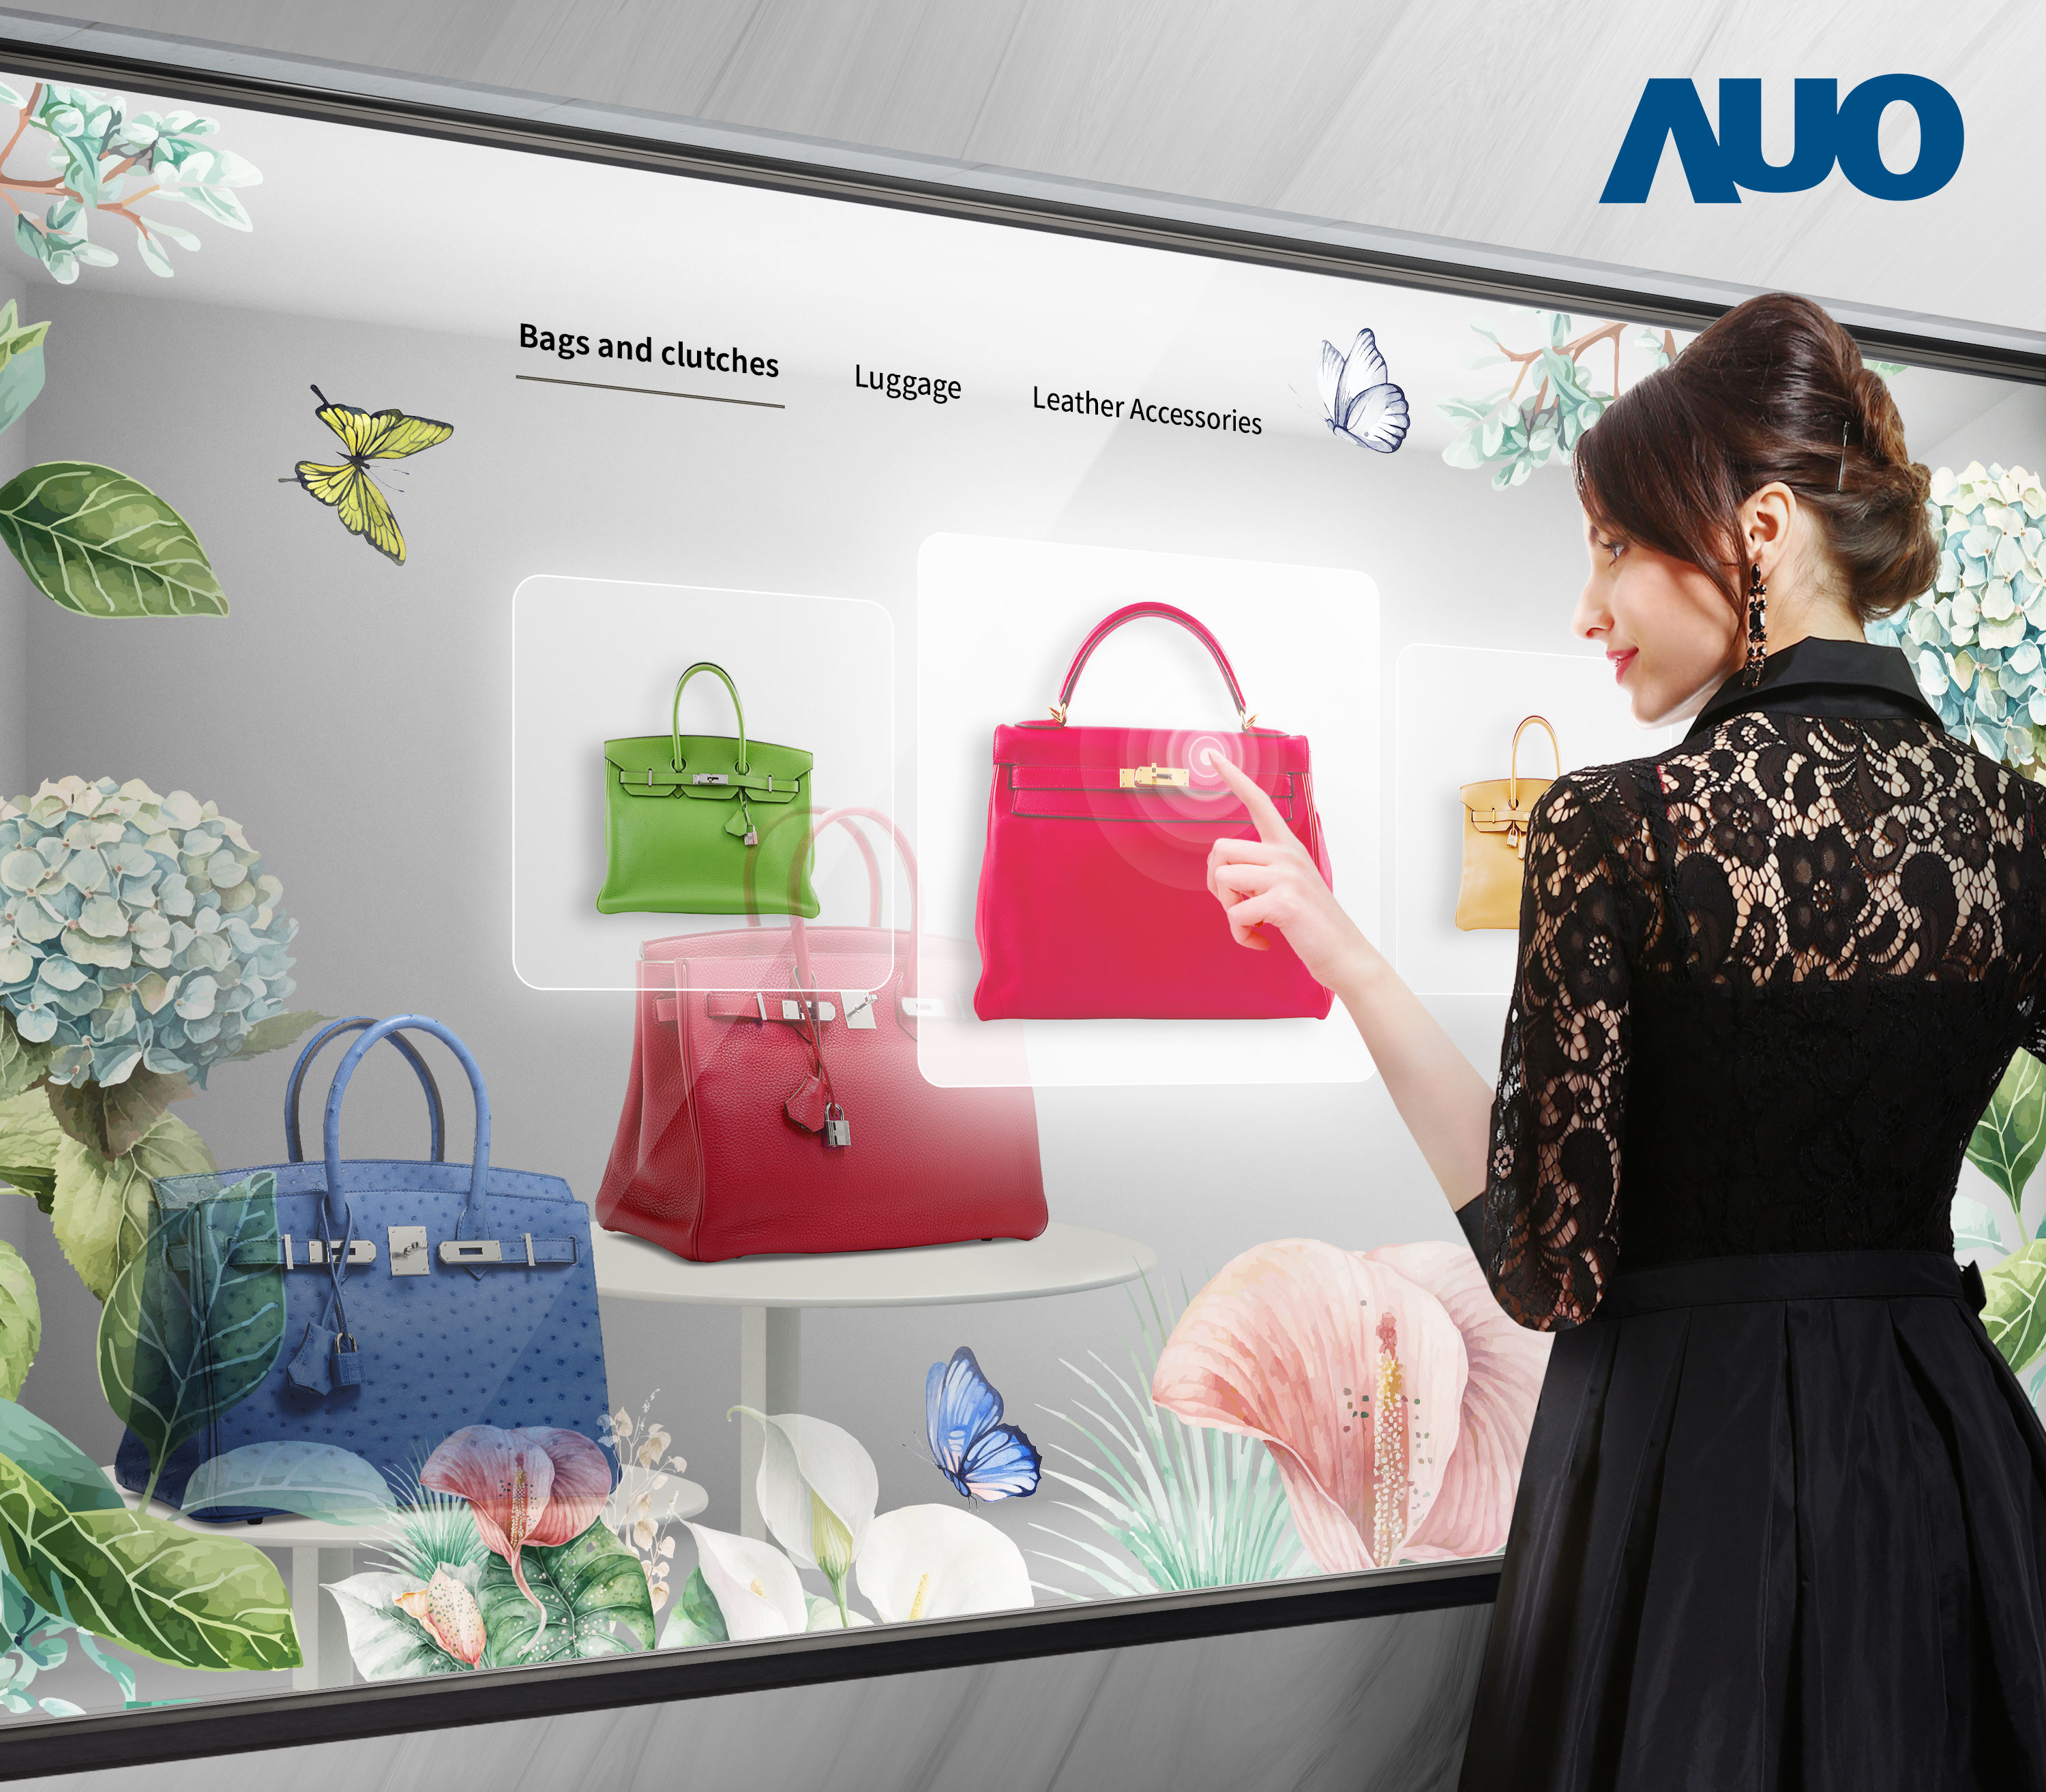 AUO’s Transparent Micro LED display is an ultimate technology suited to a variety of applications including digital signage, commercial displays, corporate meeting rooms, residential interiors, and more.